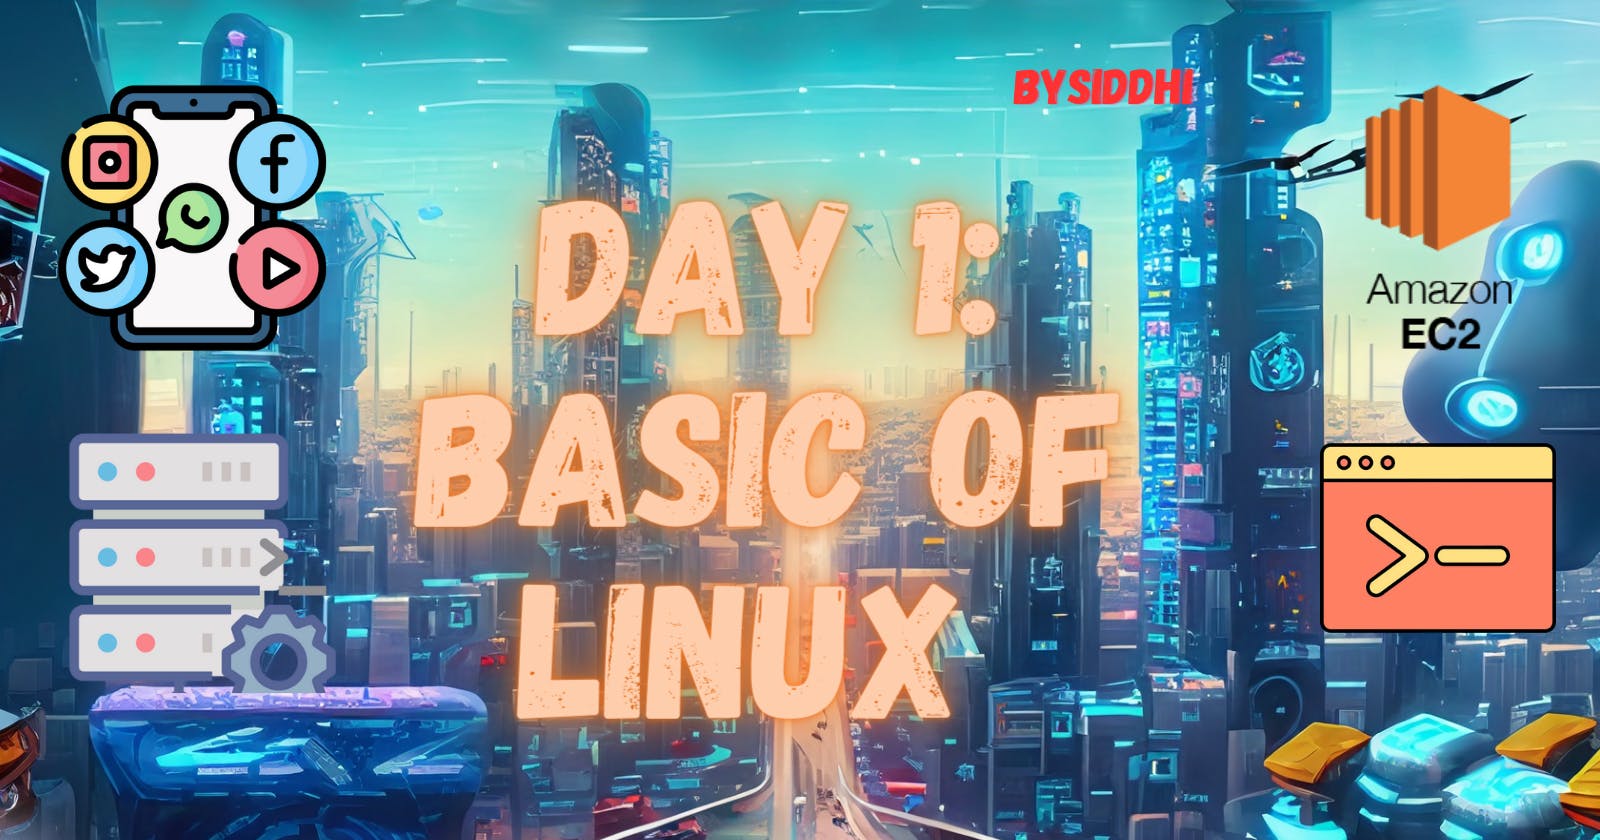 Day 1: Basic Of Linux